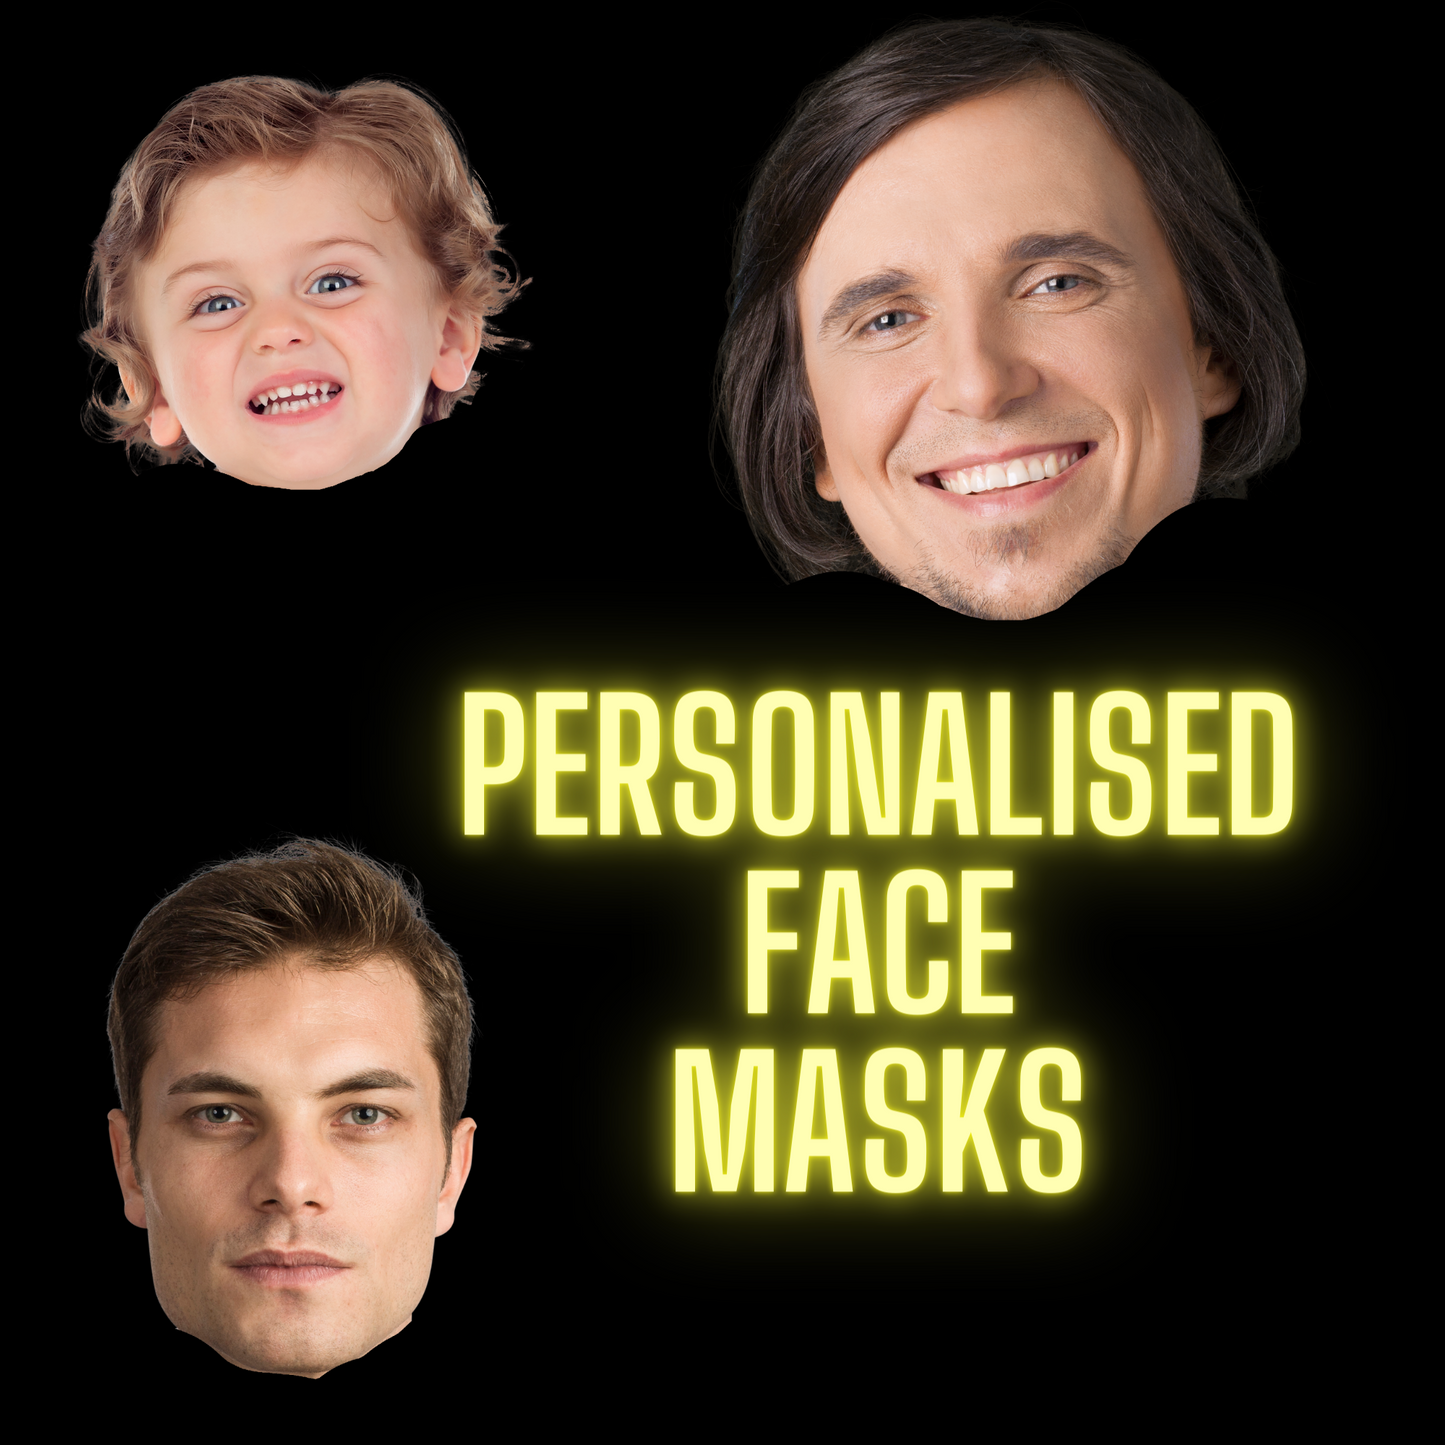 Personalised Cardboard Face Masks - Contains Minimum Order Qty 10